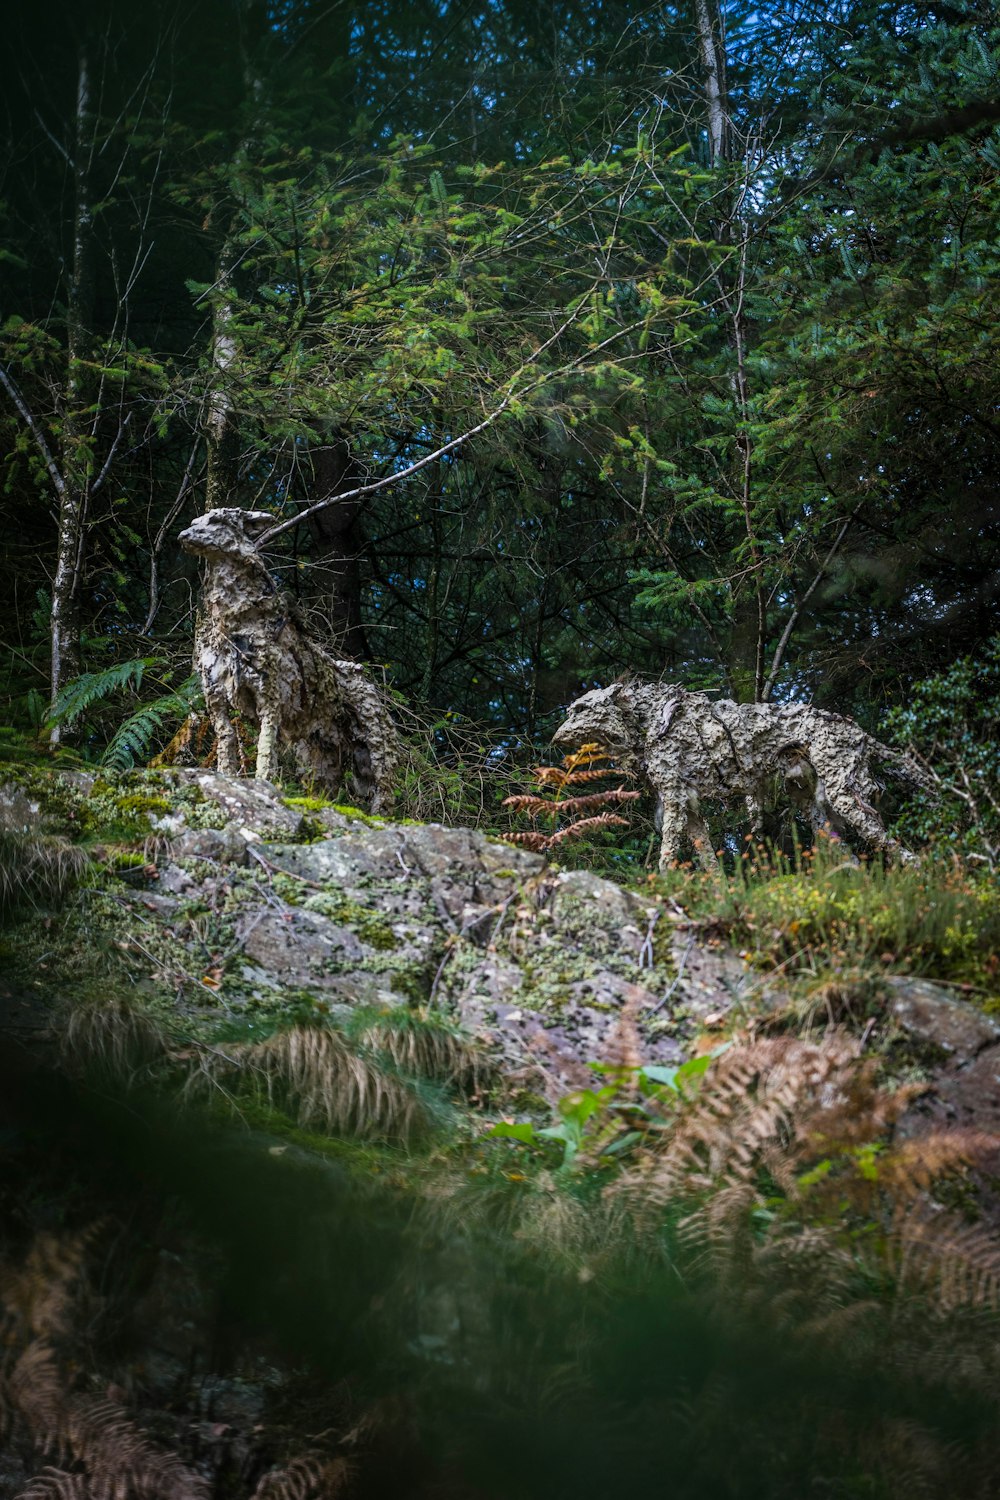 a couple of cheetahs on a rock in the woods